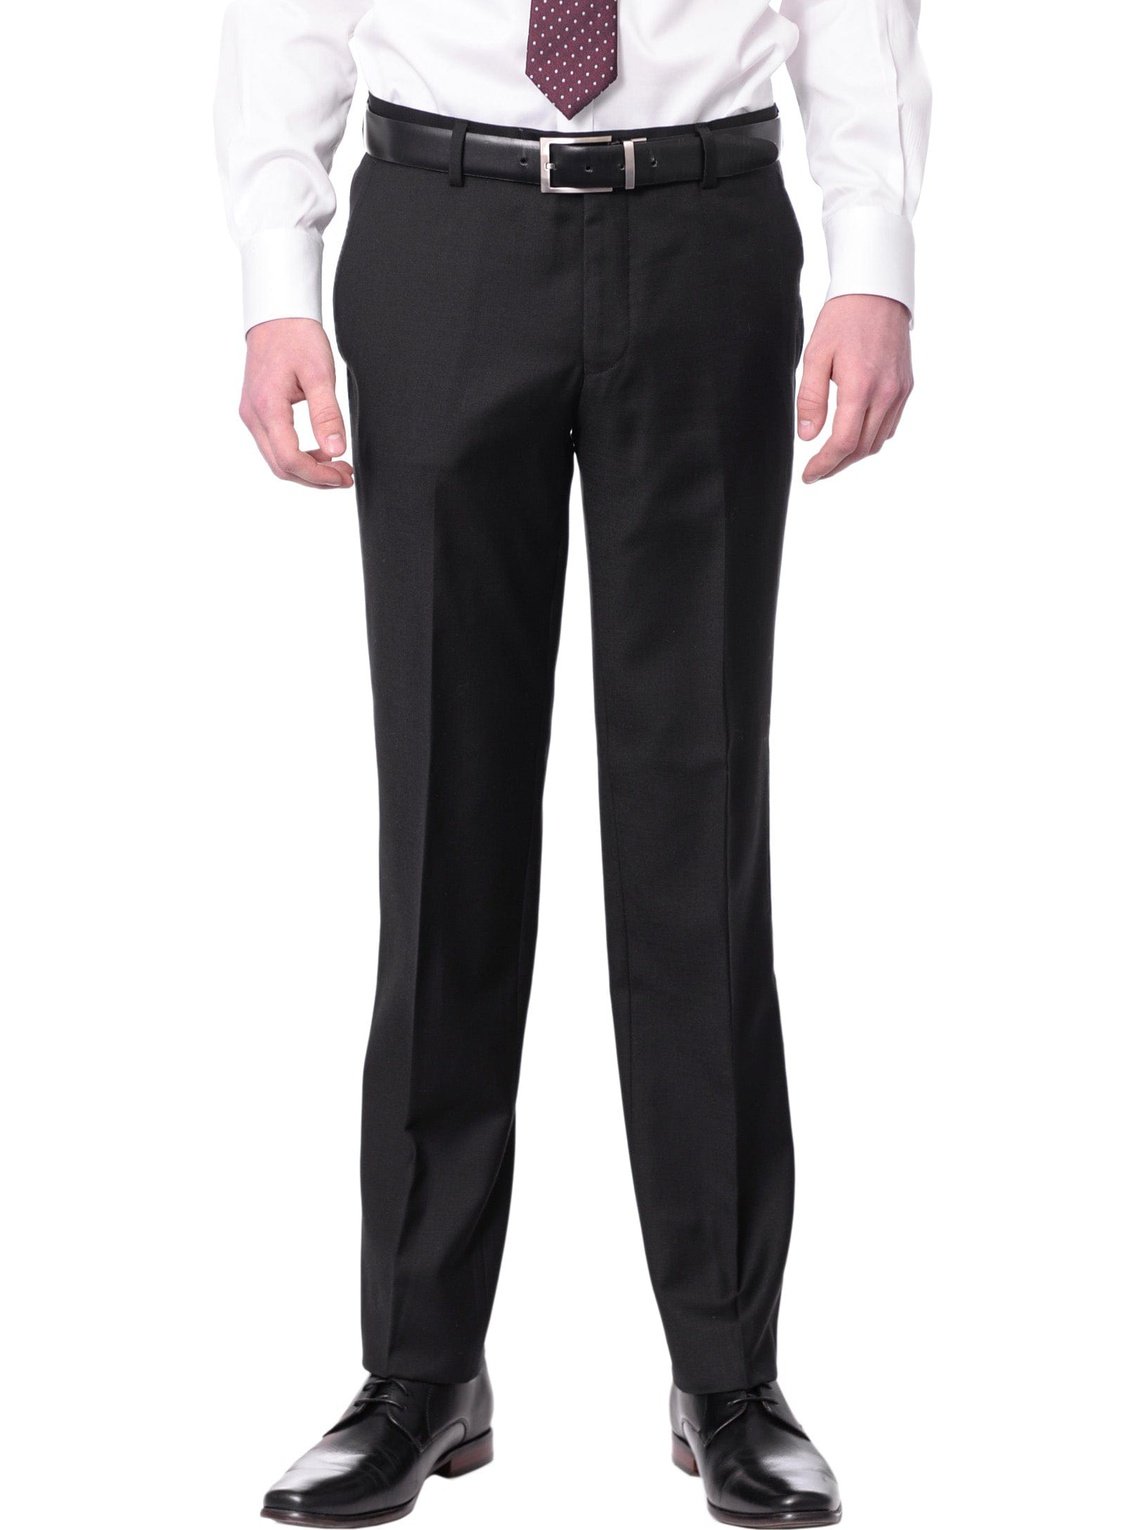 Business Casual Pants Men Classic Stretch Slim Fit Trousers for